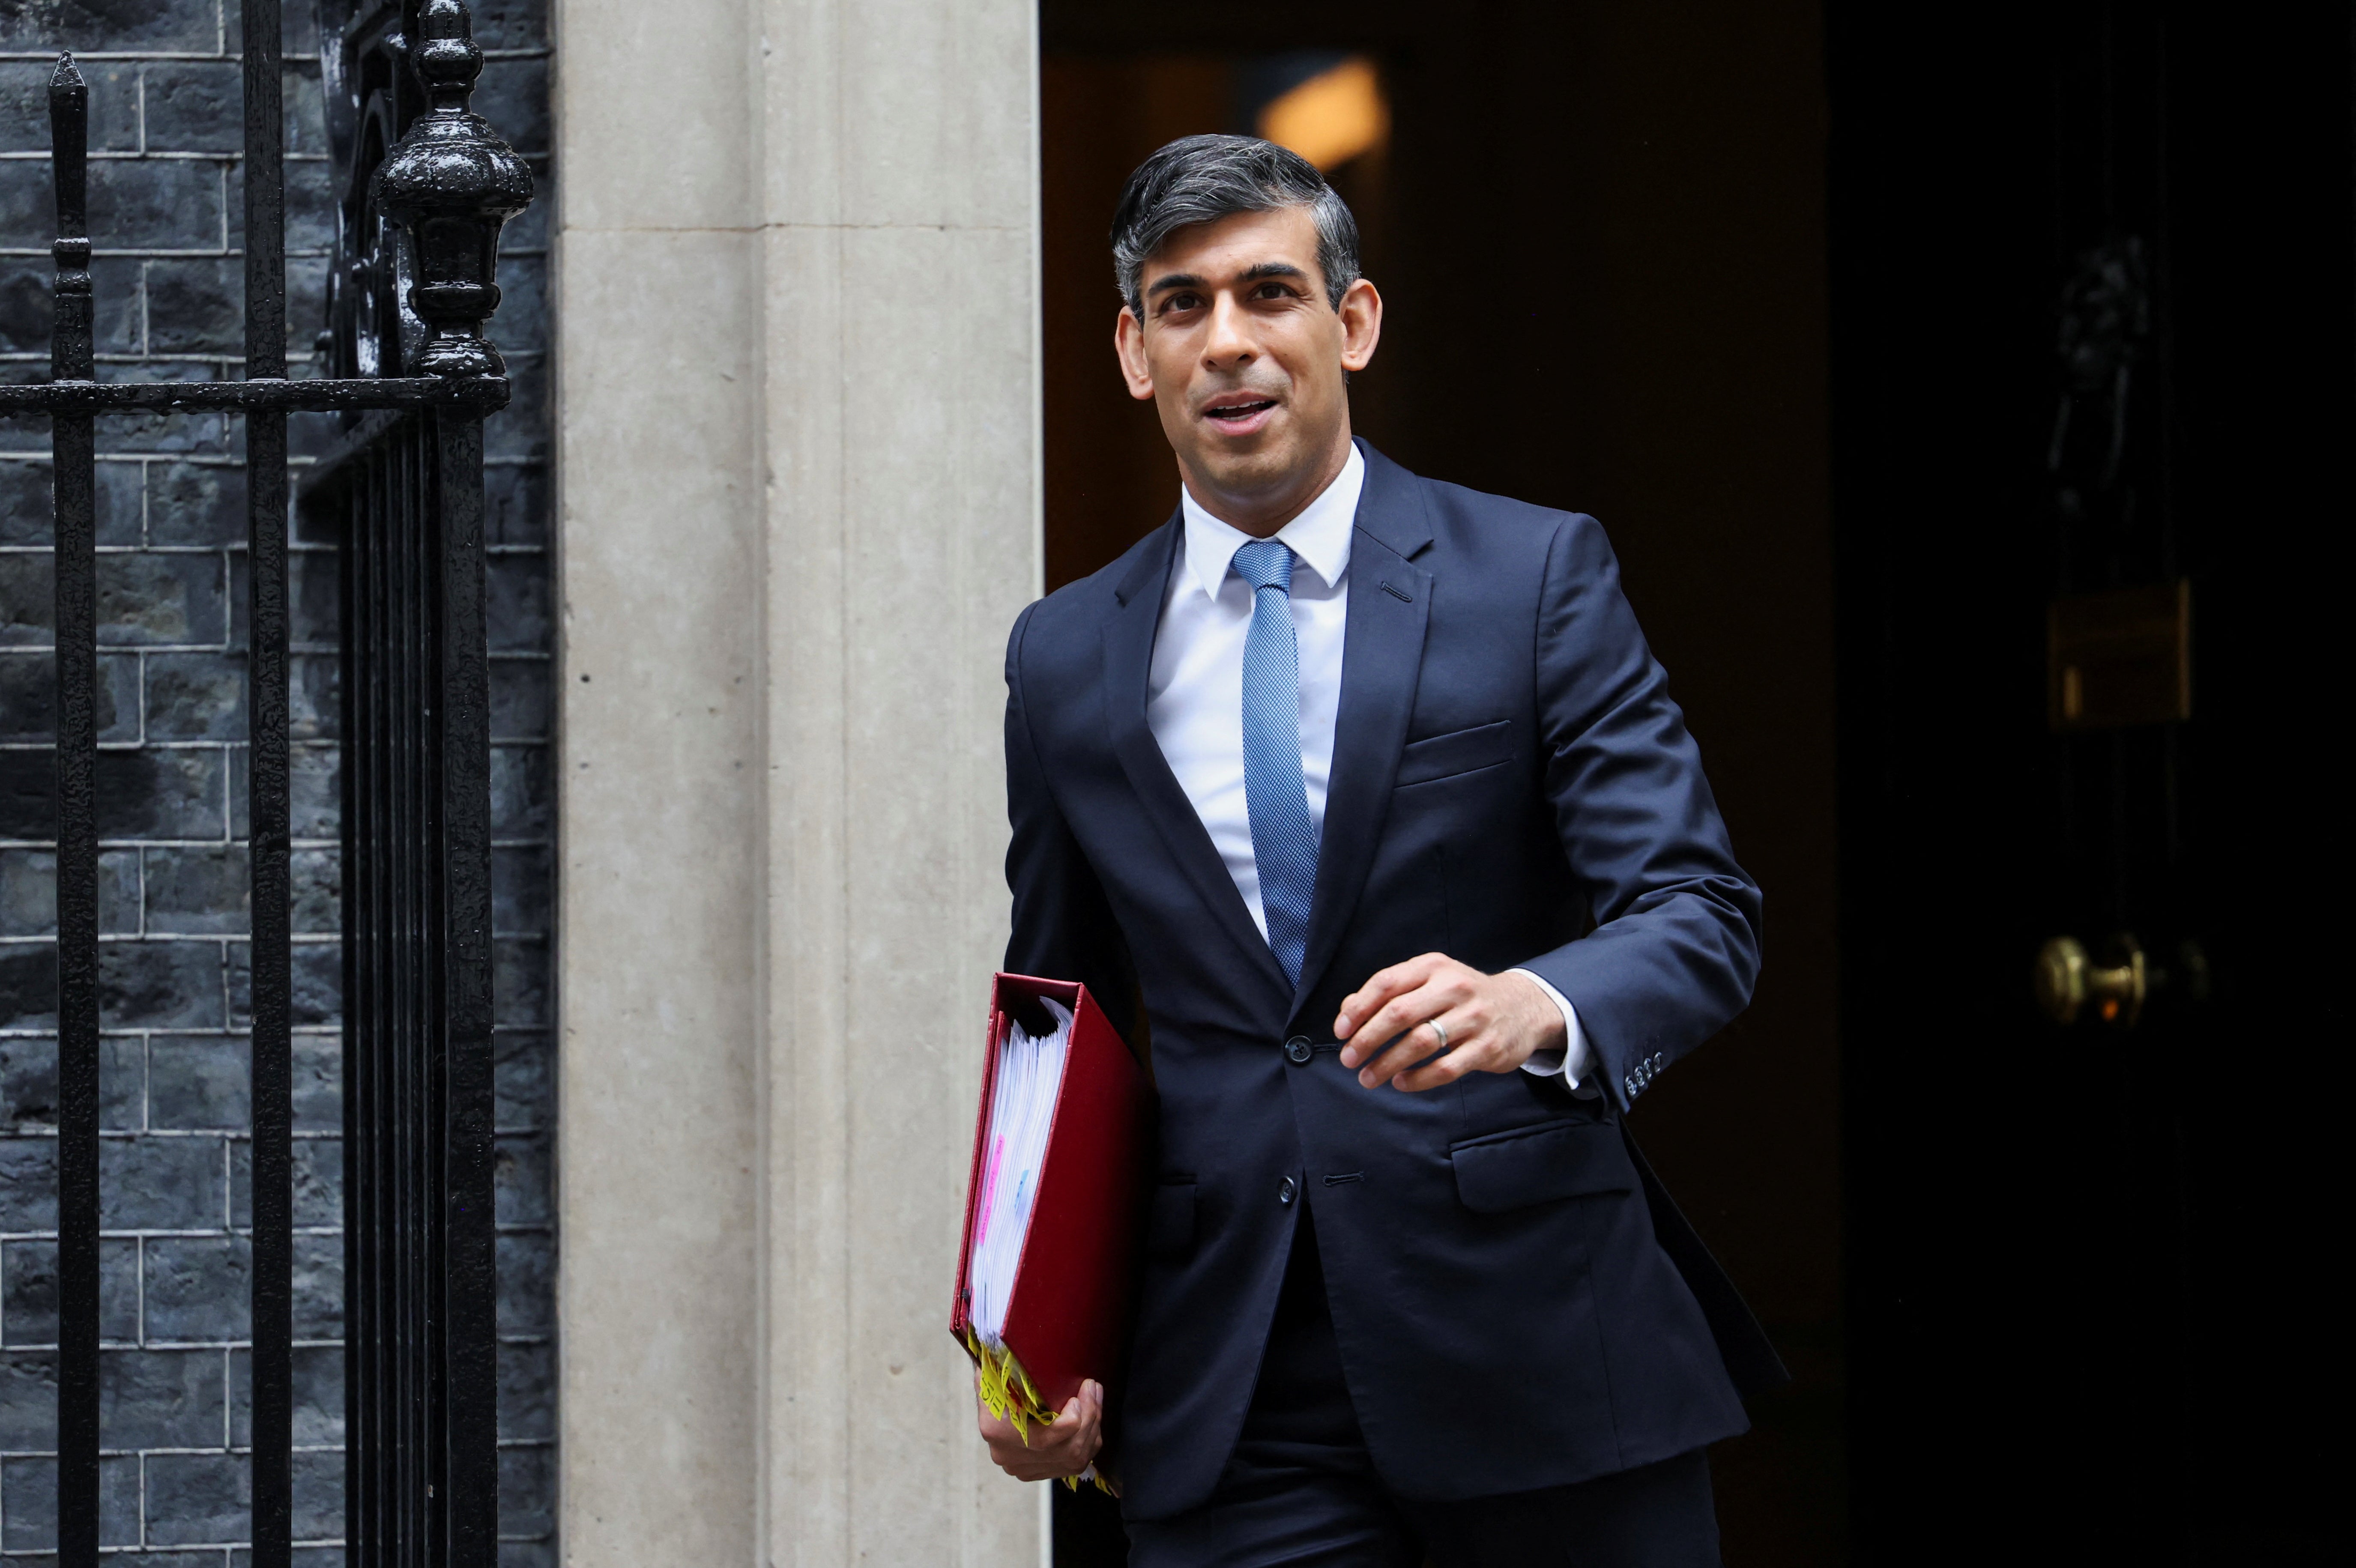 downing street, rishi sunak, general election, independent live streams, watch live outside downing street as sunak set to make general election announcement